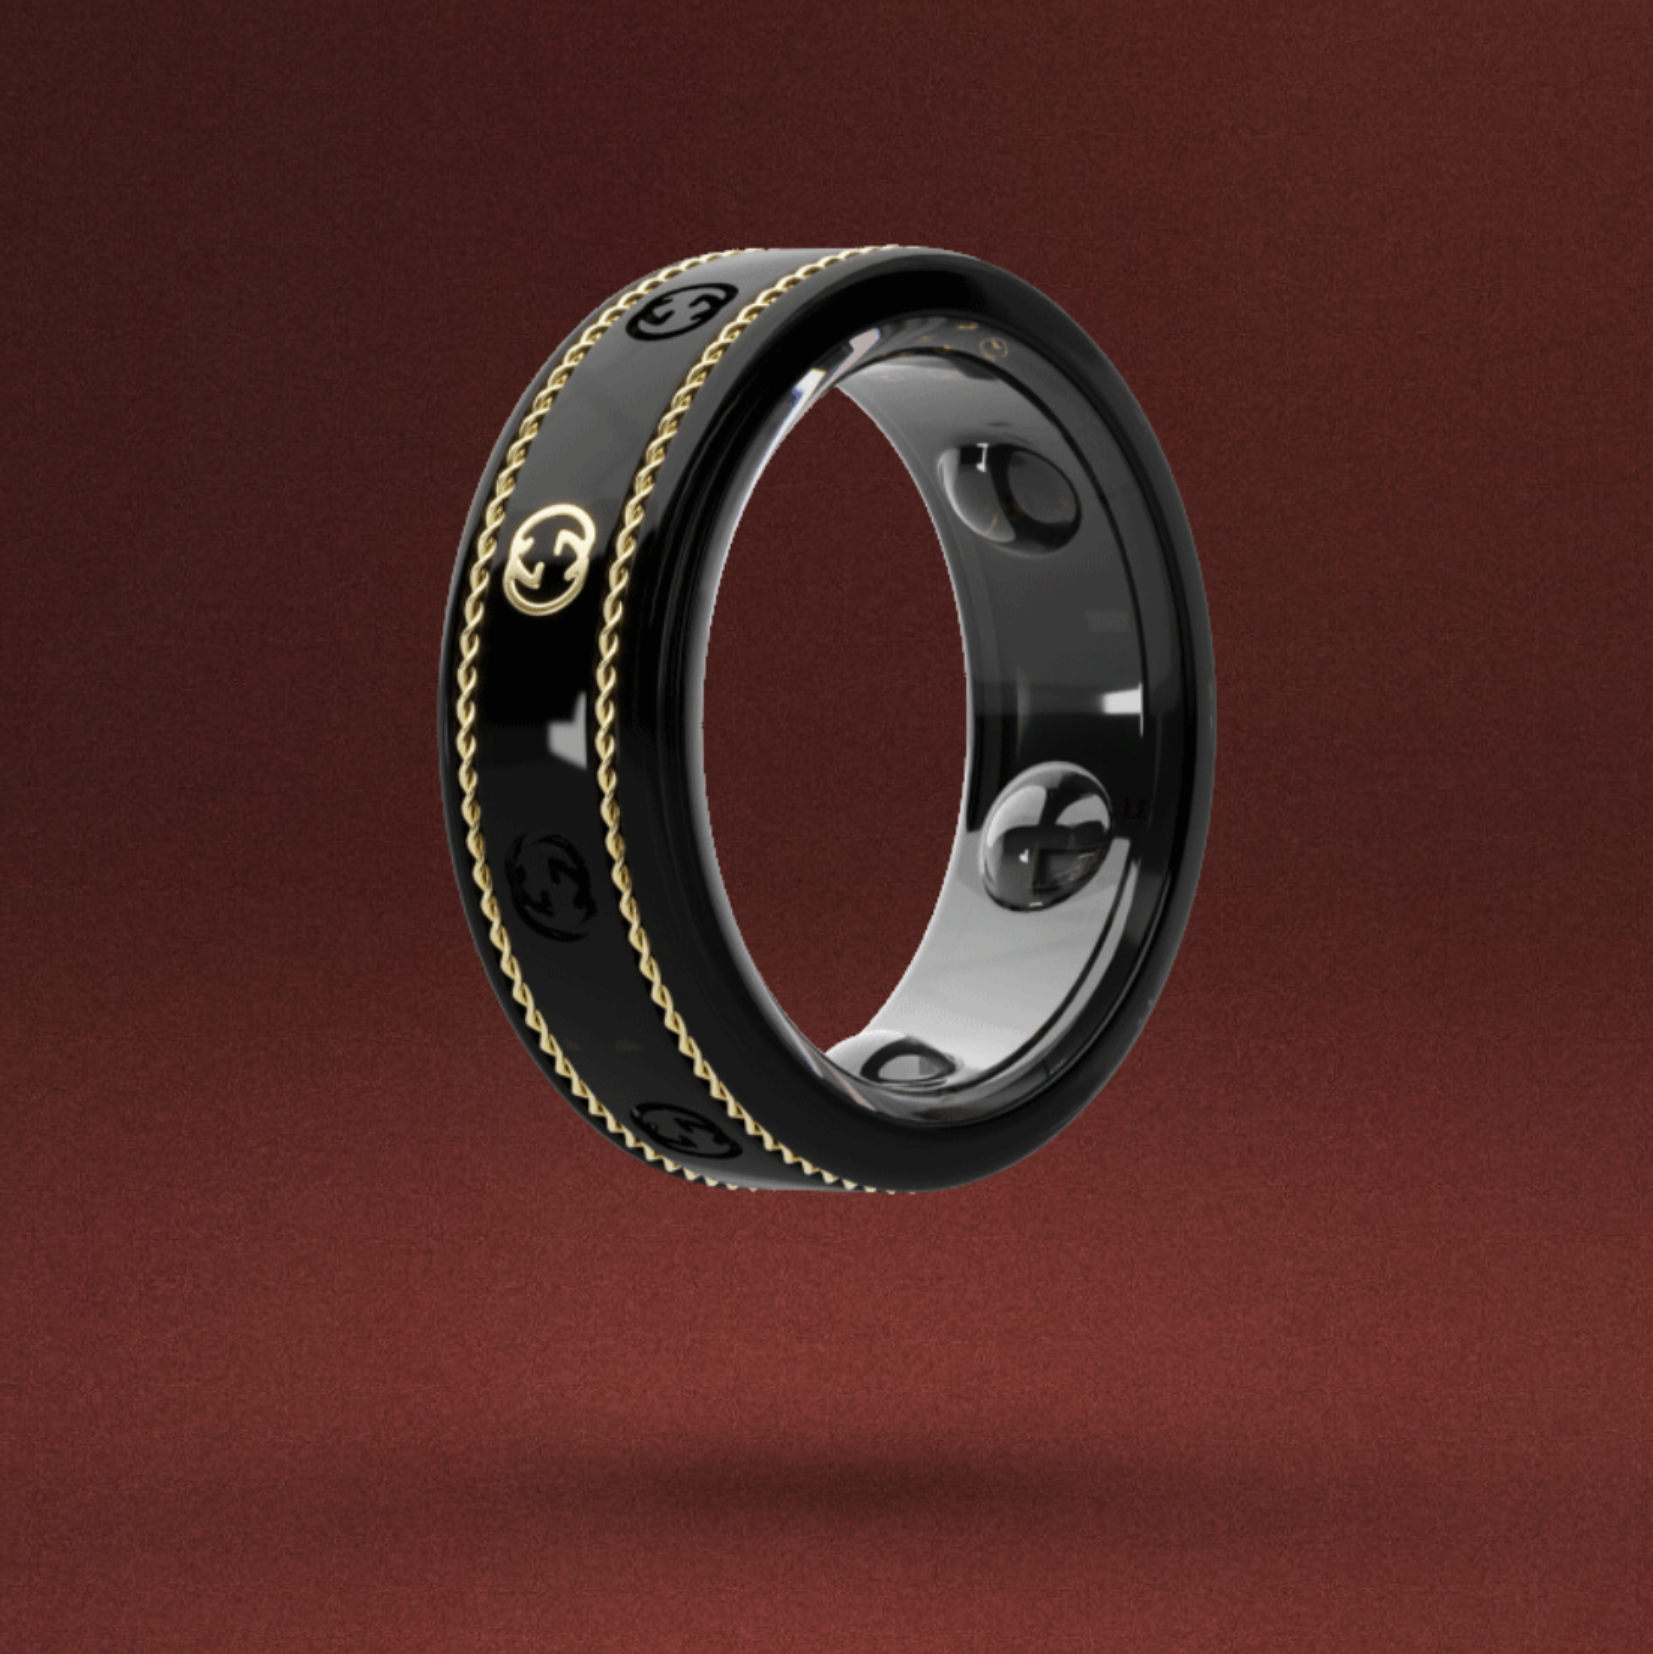 Gucci x Ōura Ring - Product Information, Latest Updates, and 